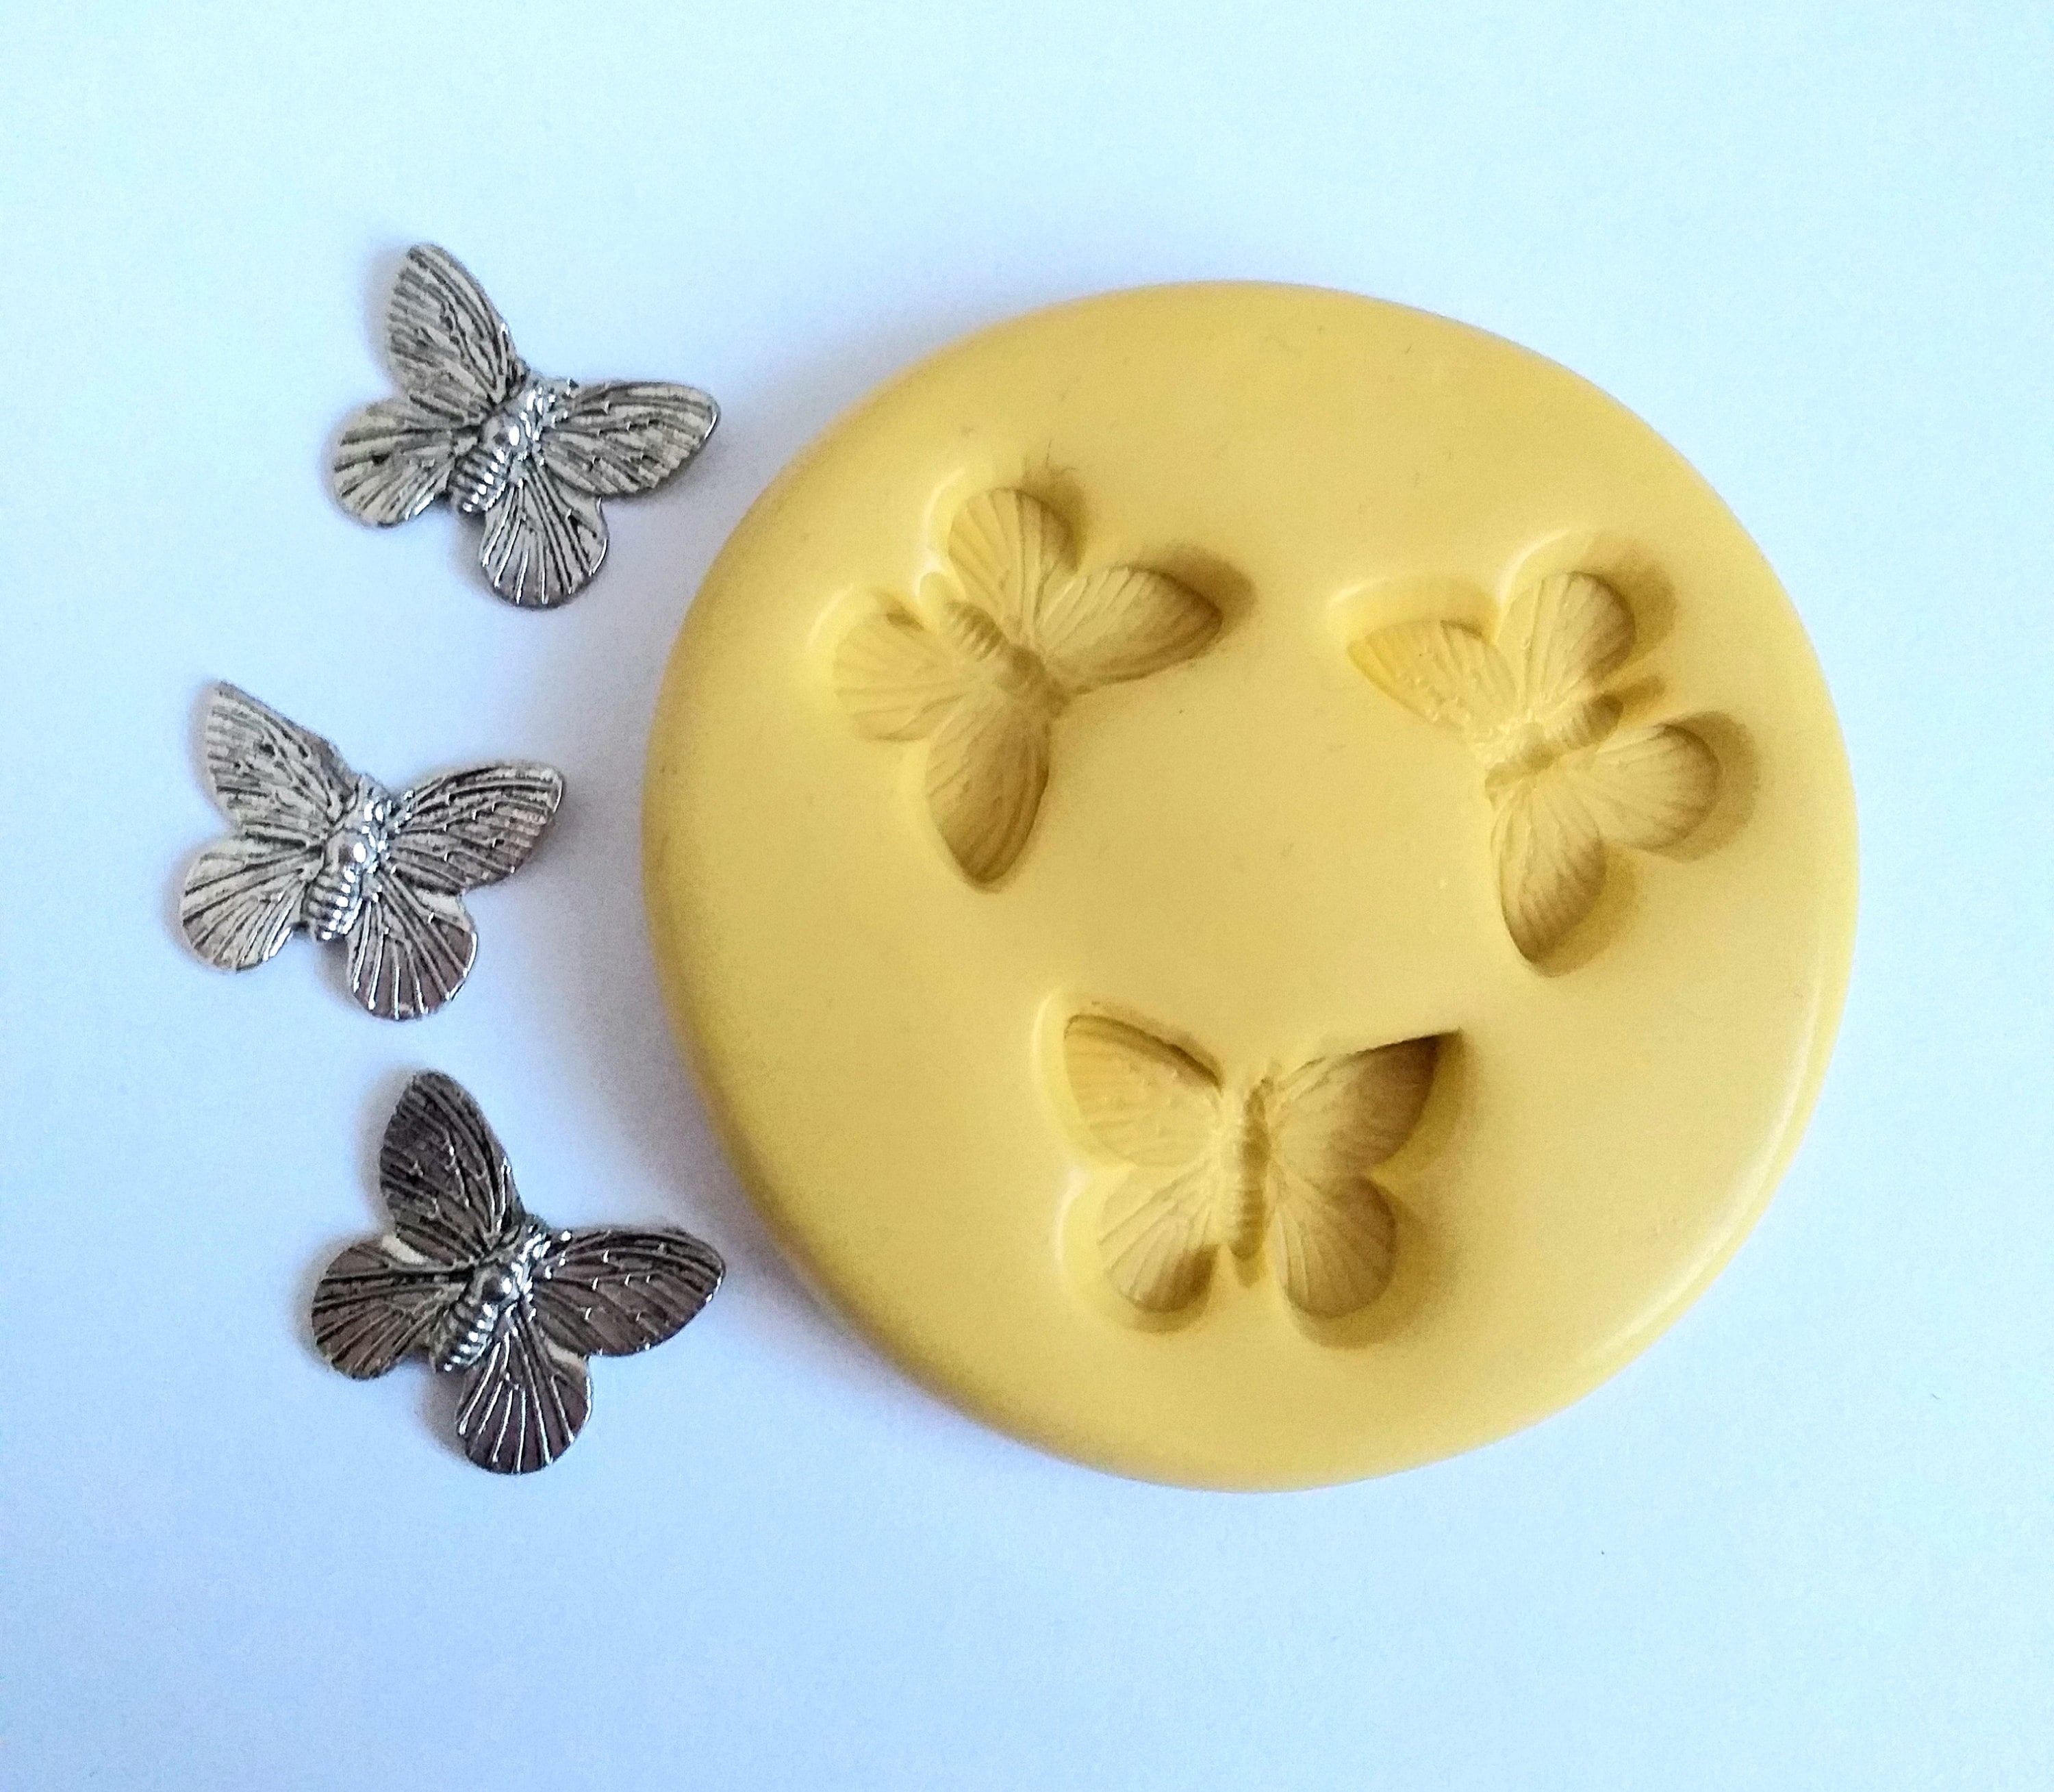 Butterfly Resin Mold 3 Pcs, Mini Butterfly Chocolate Molds Silicone for  Cake Decoration Sugar Cupcake Topper Cake Pop Popsicle Polymer Clay Crafts